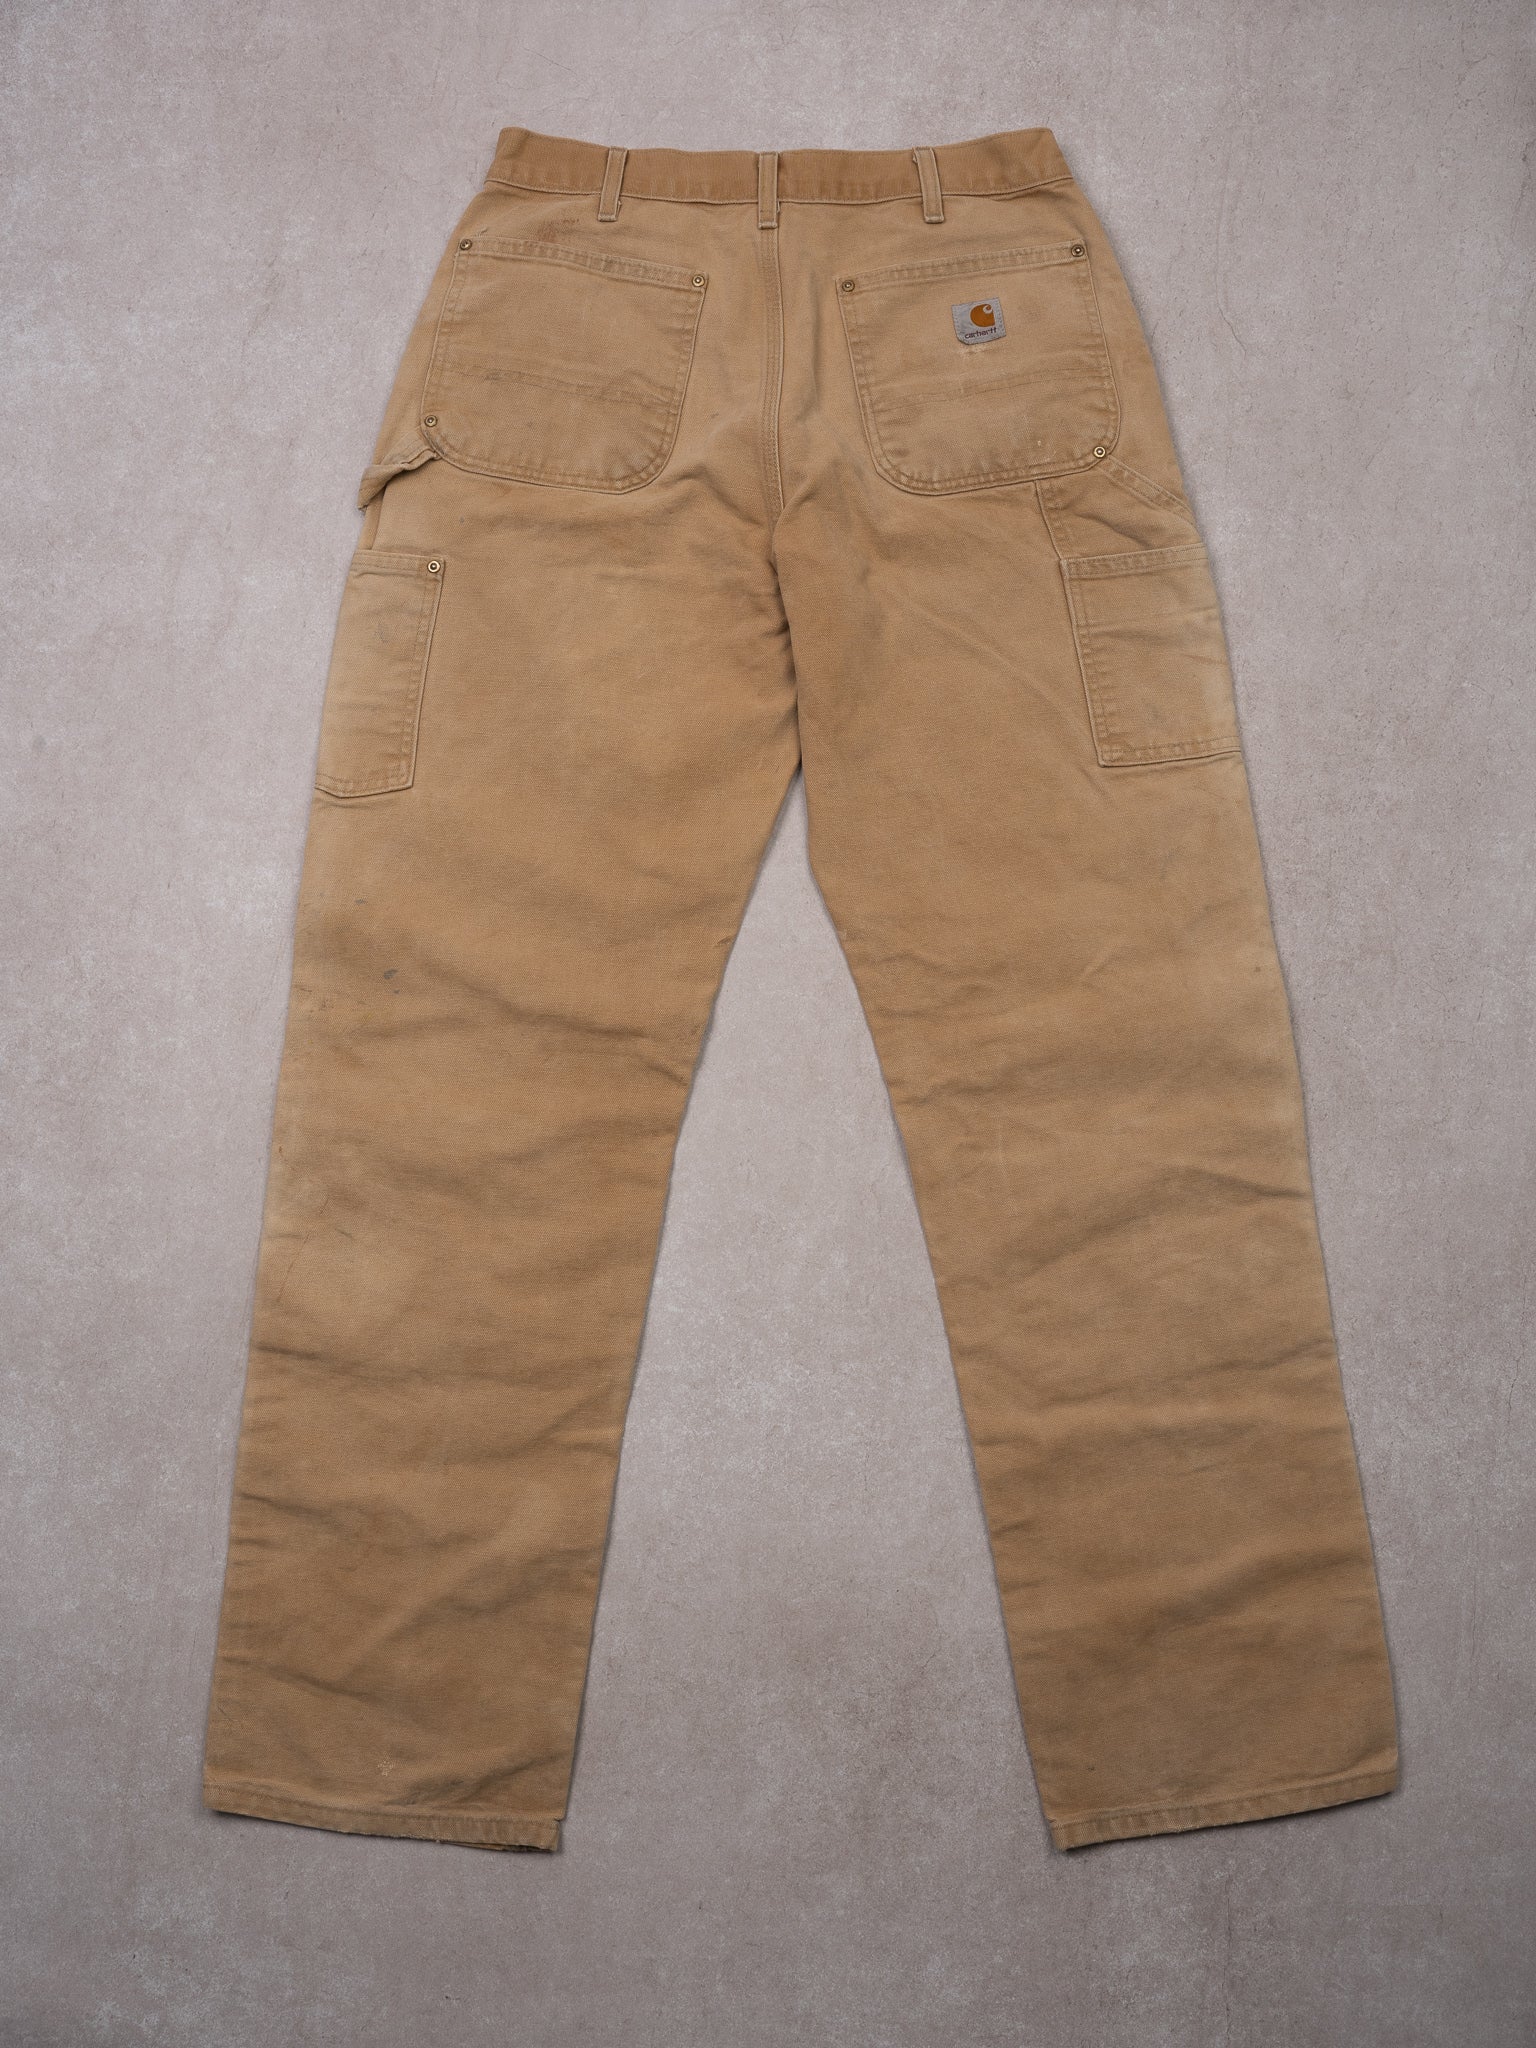 Vintage Light Washed Beige Carhartt Double Knee Dungaree Cargo Pants (30 x 32)